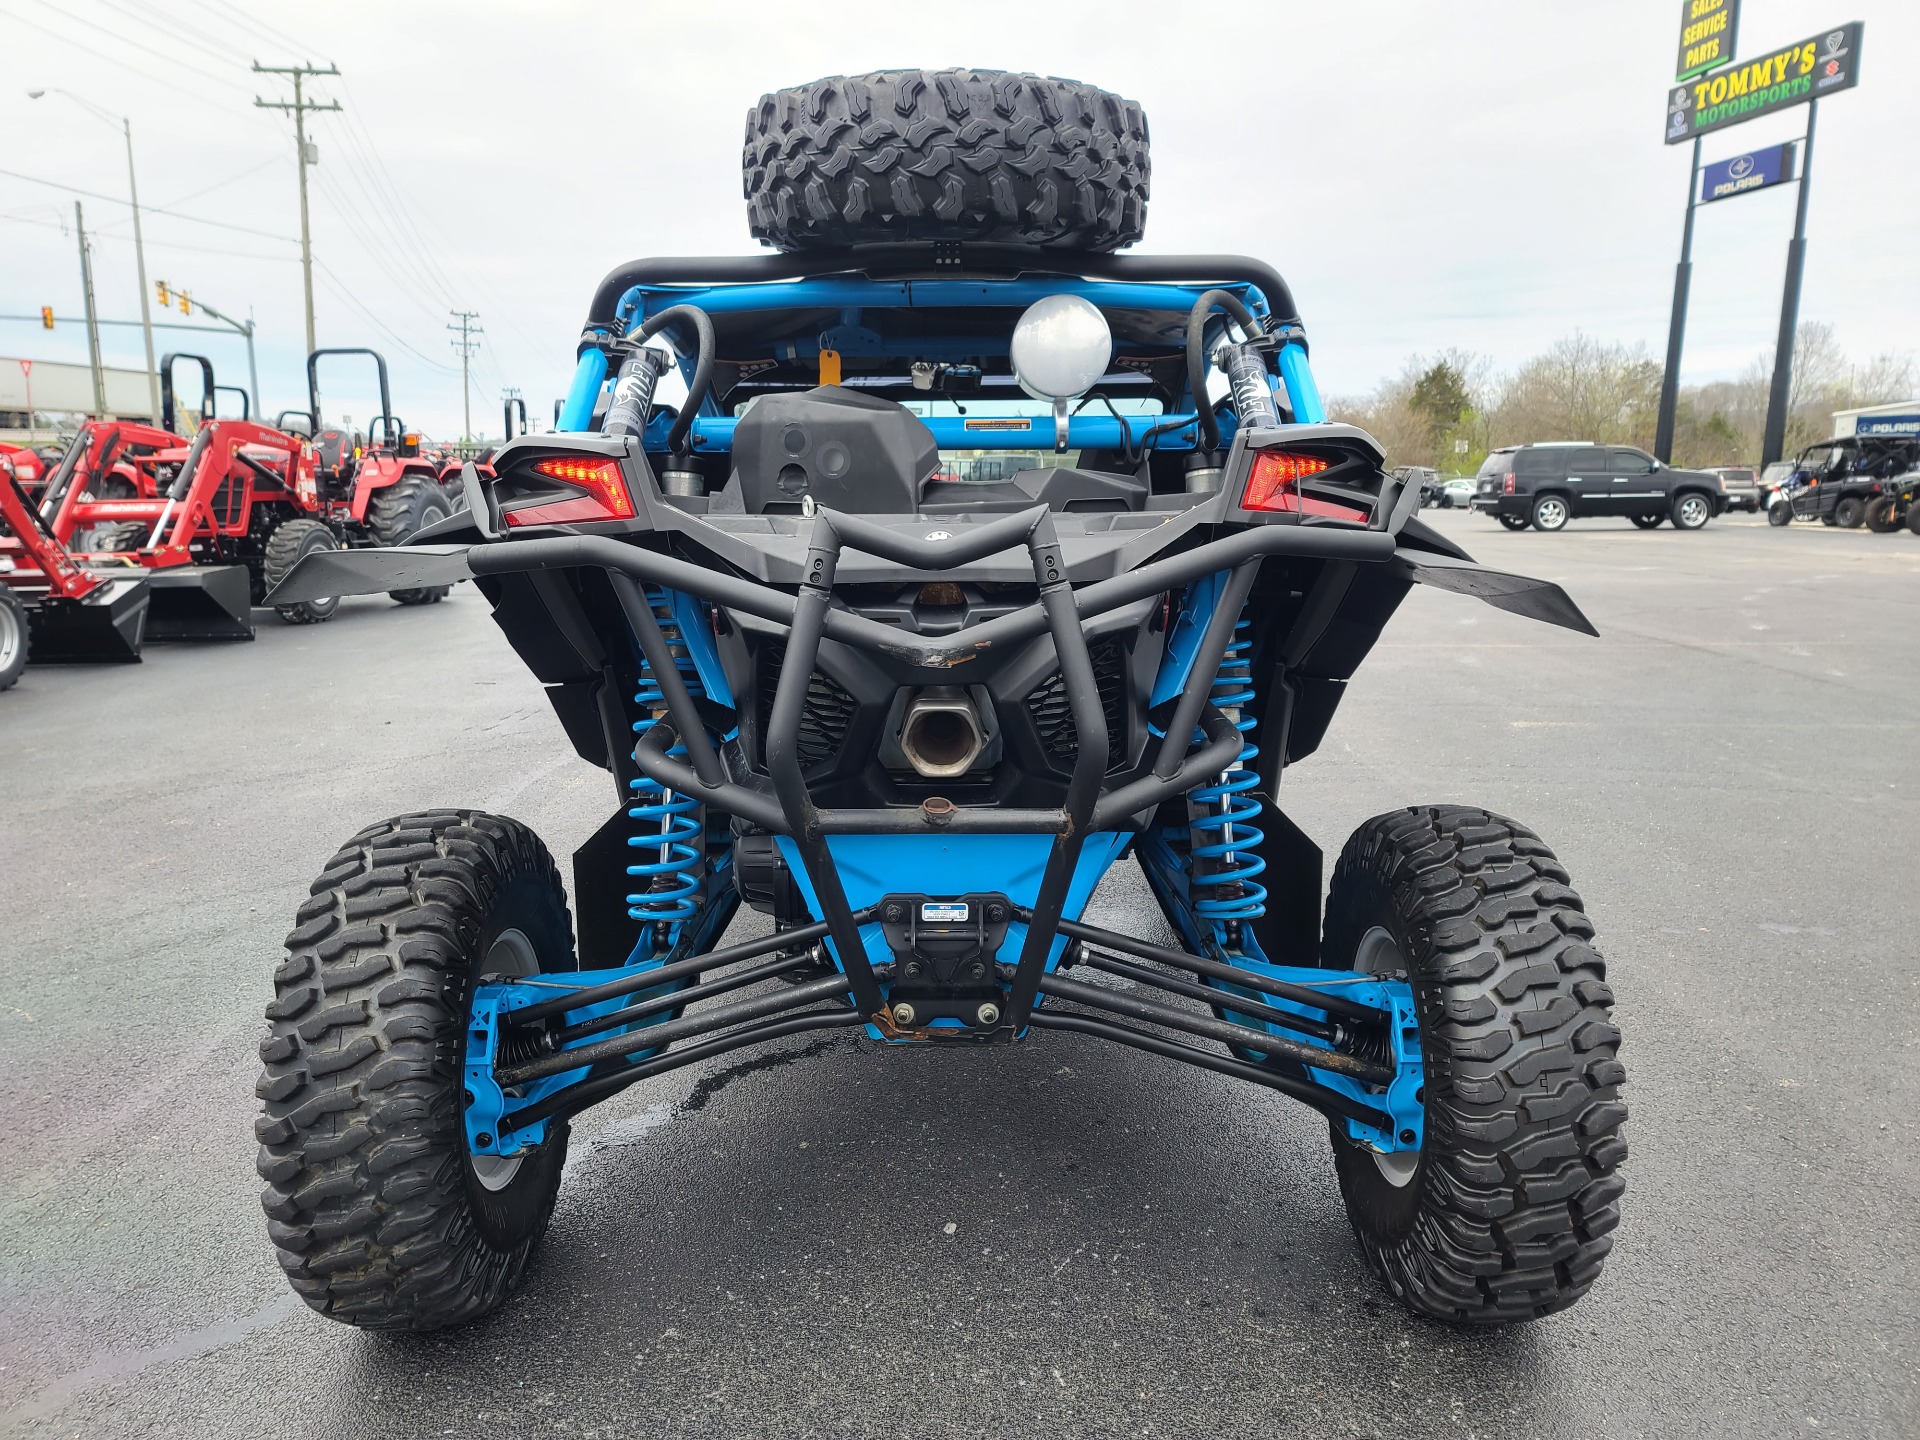 2019 Can-Am Maverick X3 X rc Turbo R in Clinton, Tennessee - Photo 7